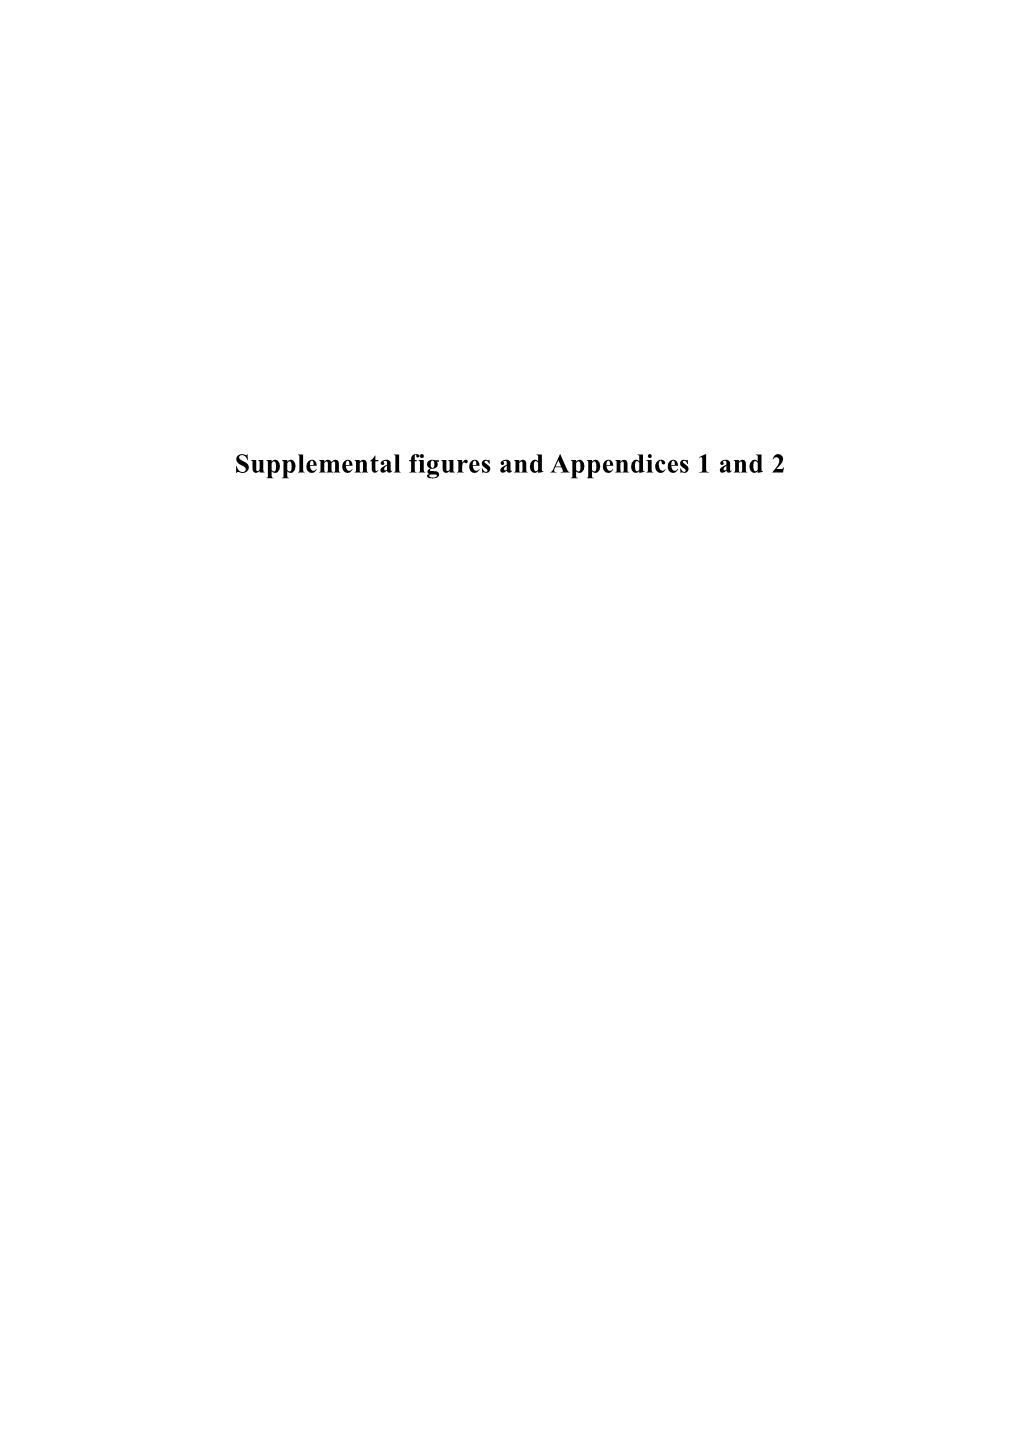 Supplemental Figures and Appendices 1 and 2